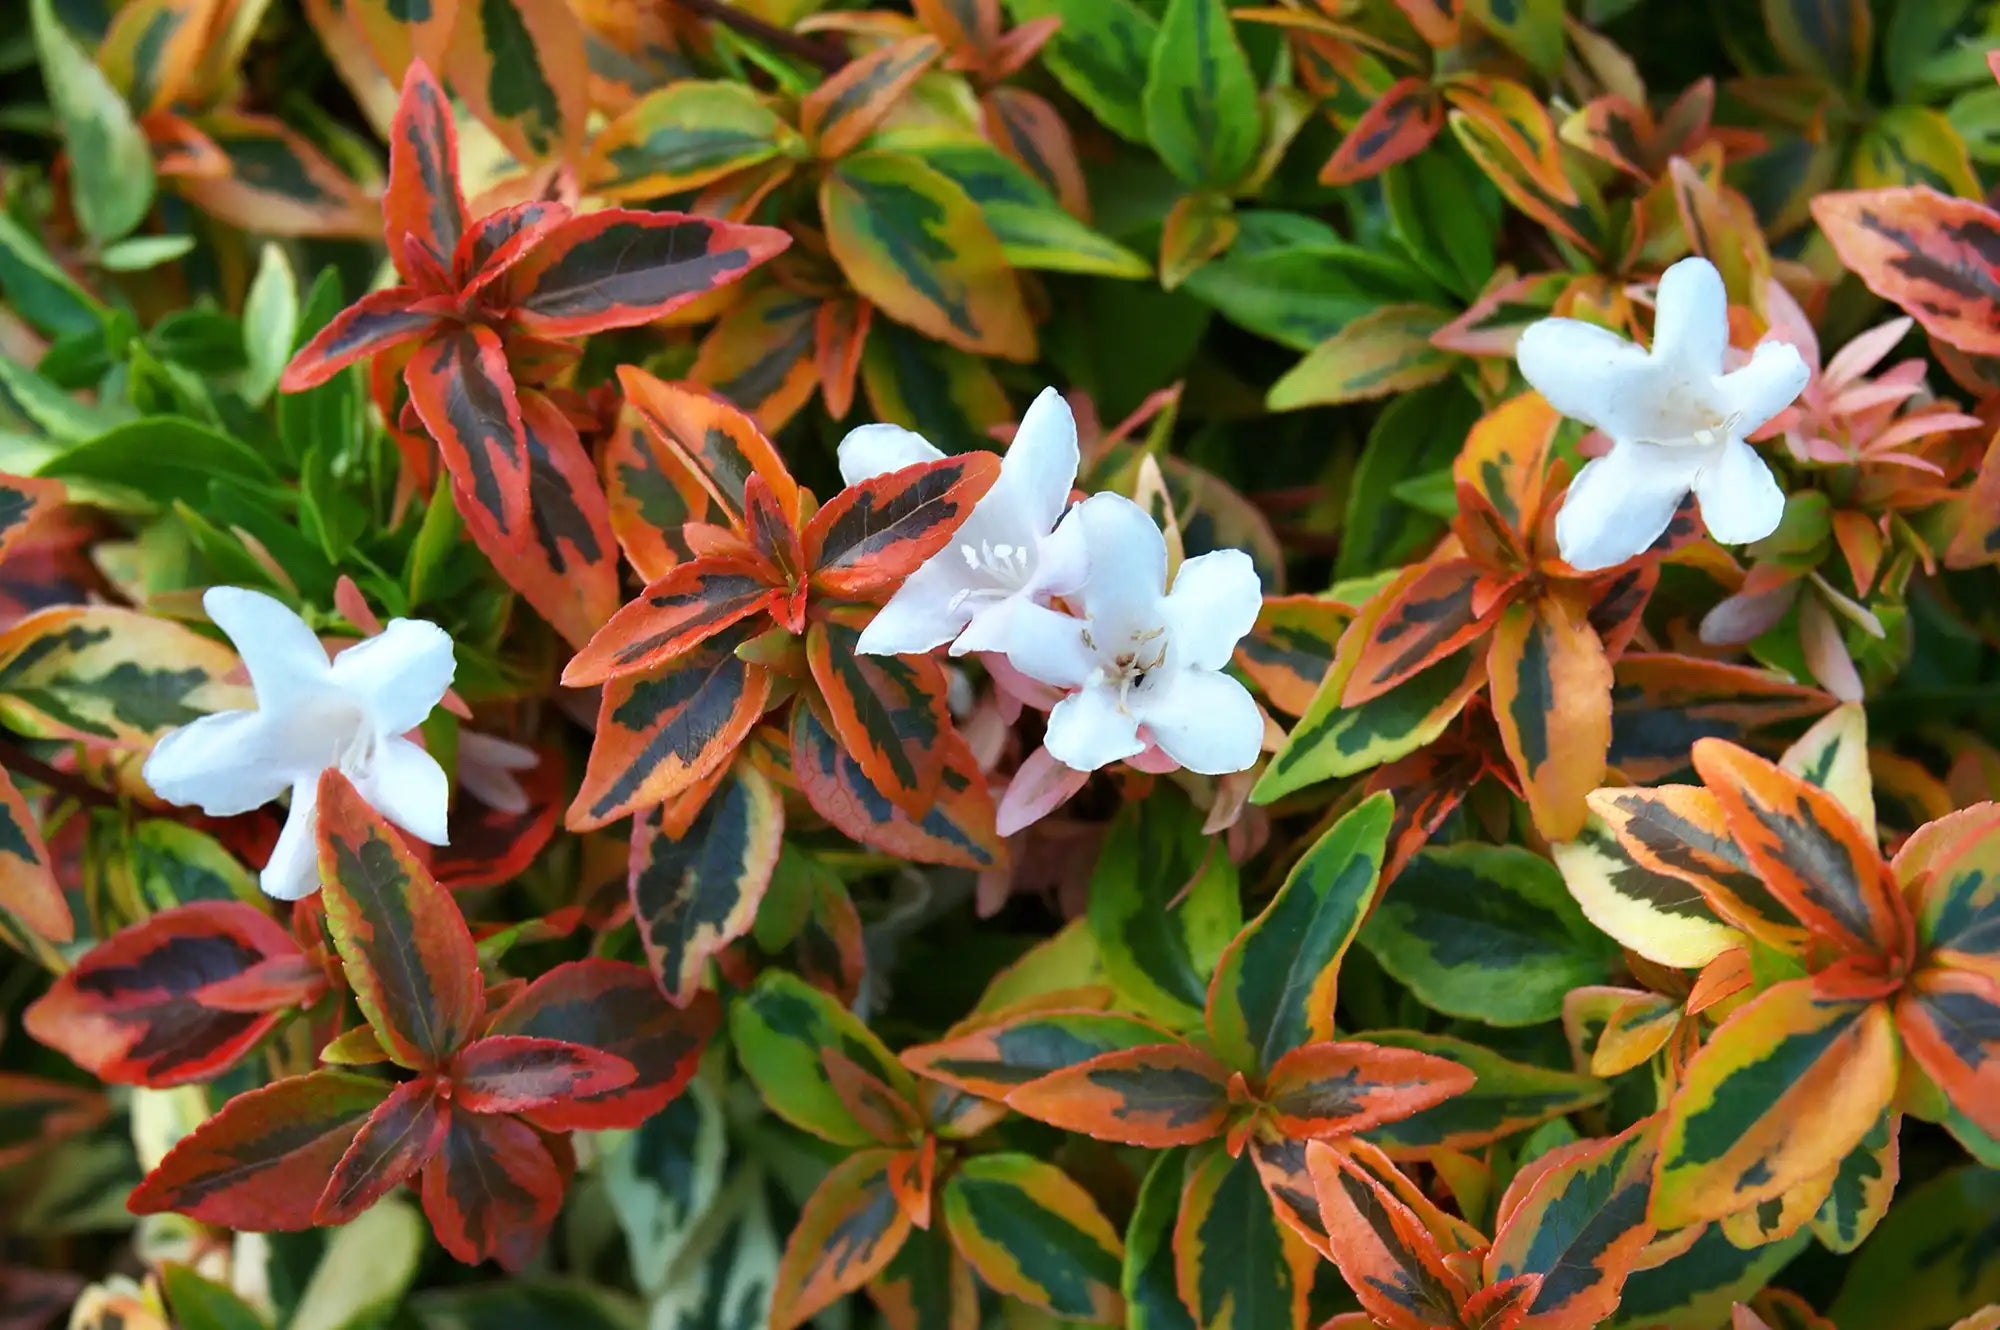 Closeup of a Kaleidoscope Abelia bush with bell shaped white flowers. Green, red, orange and yellow variegated leaves, each leaf has a deep green colored stroke in the middle as though hand-painted. Hence, the name Kaleidoscope makes perfect sense.